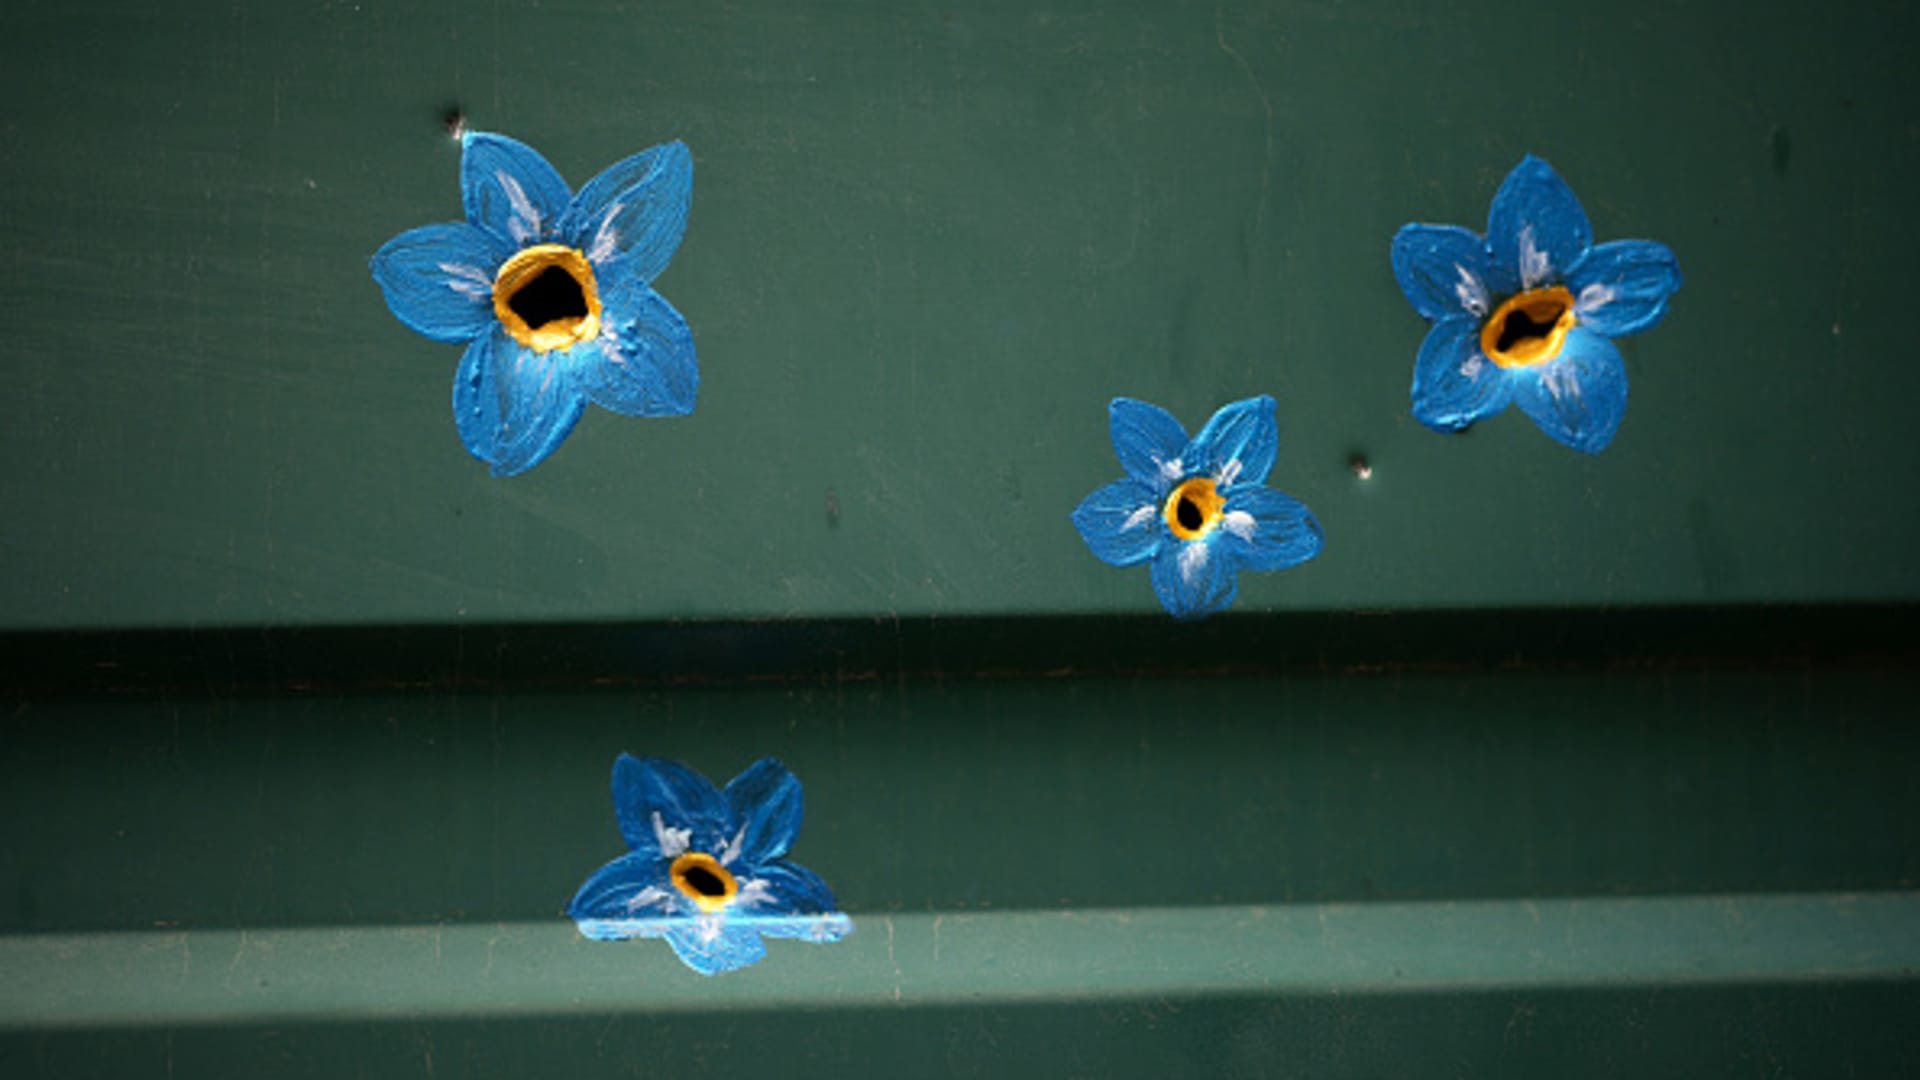 Forget-me-not flowers painted around bullet and shrapnel holes by Canadian artist Ivanka Siolkowsky in the war torn suburb of Bucha on May 23, 2022 in Bucha, Ukraine